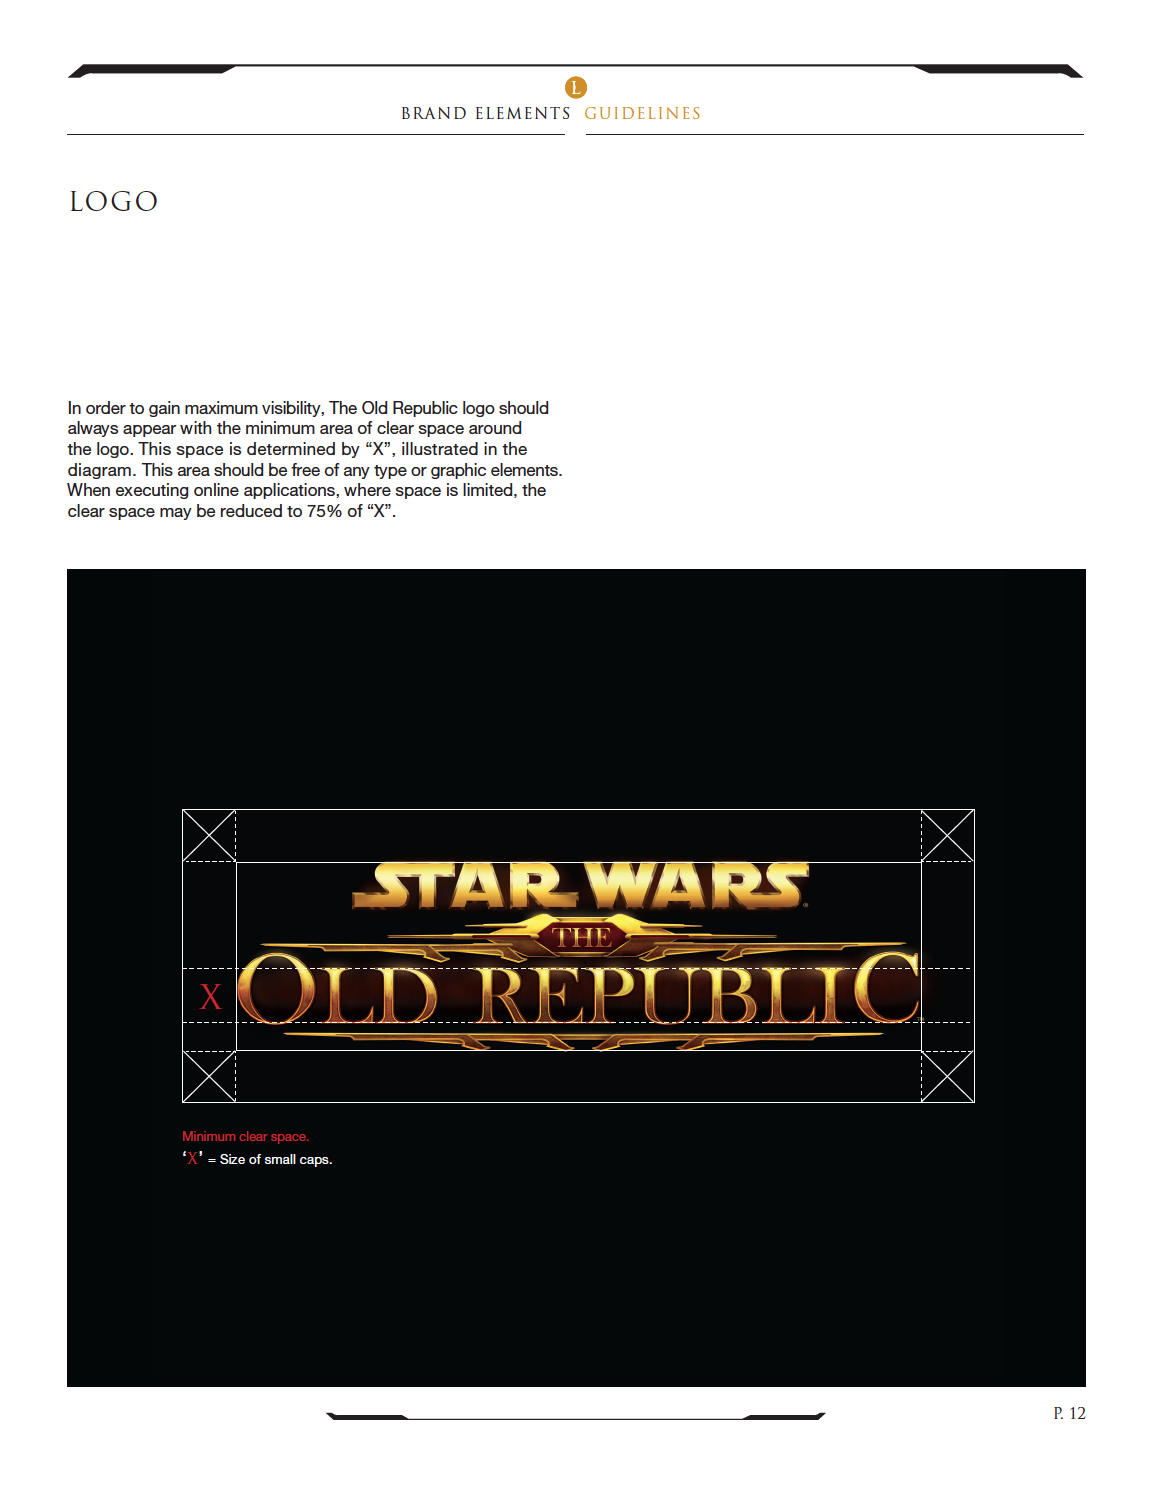 SWTOR-09.png